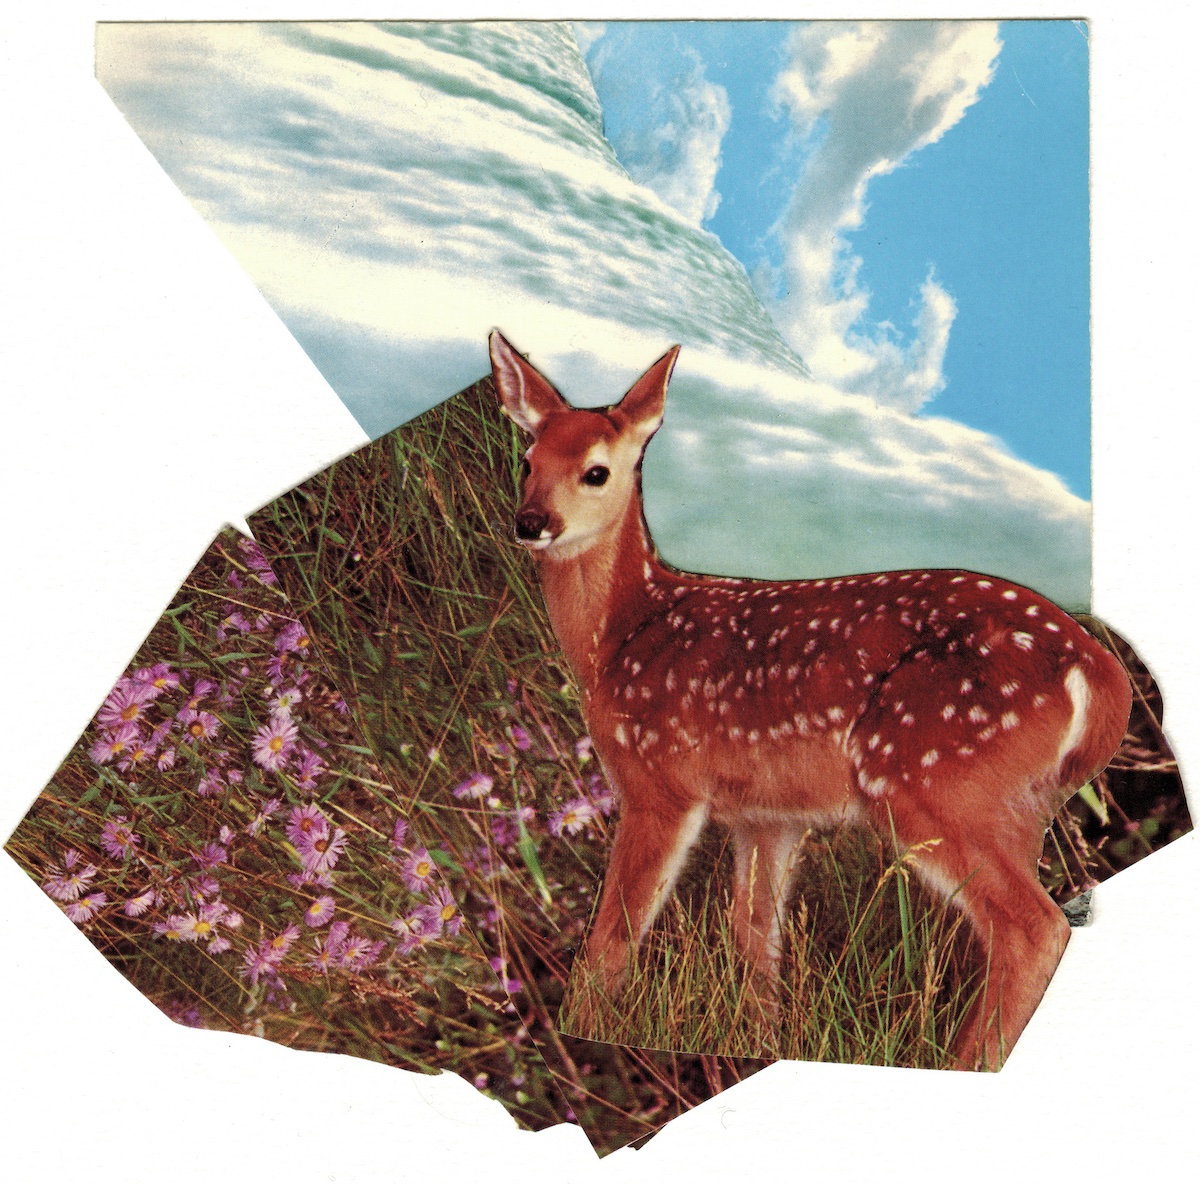 A fawn stands against a tangle of pink and purple flowers, behind its head a swirl of clouds against a blue sky.